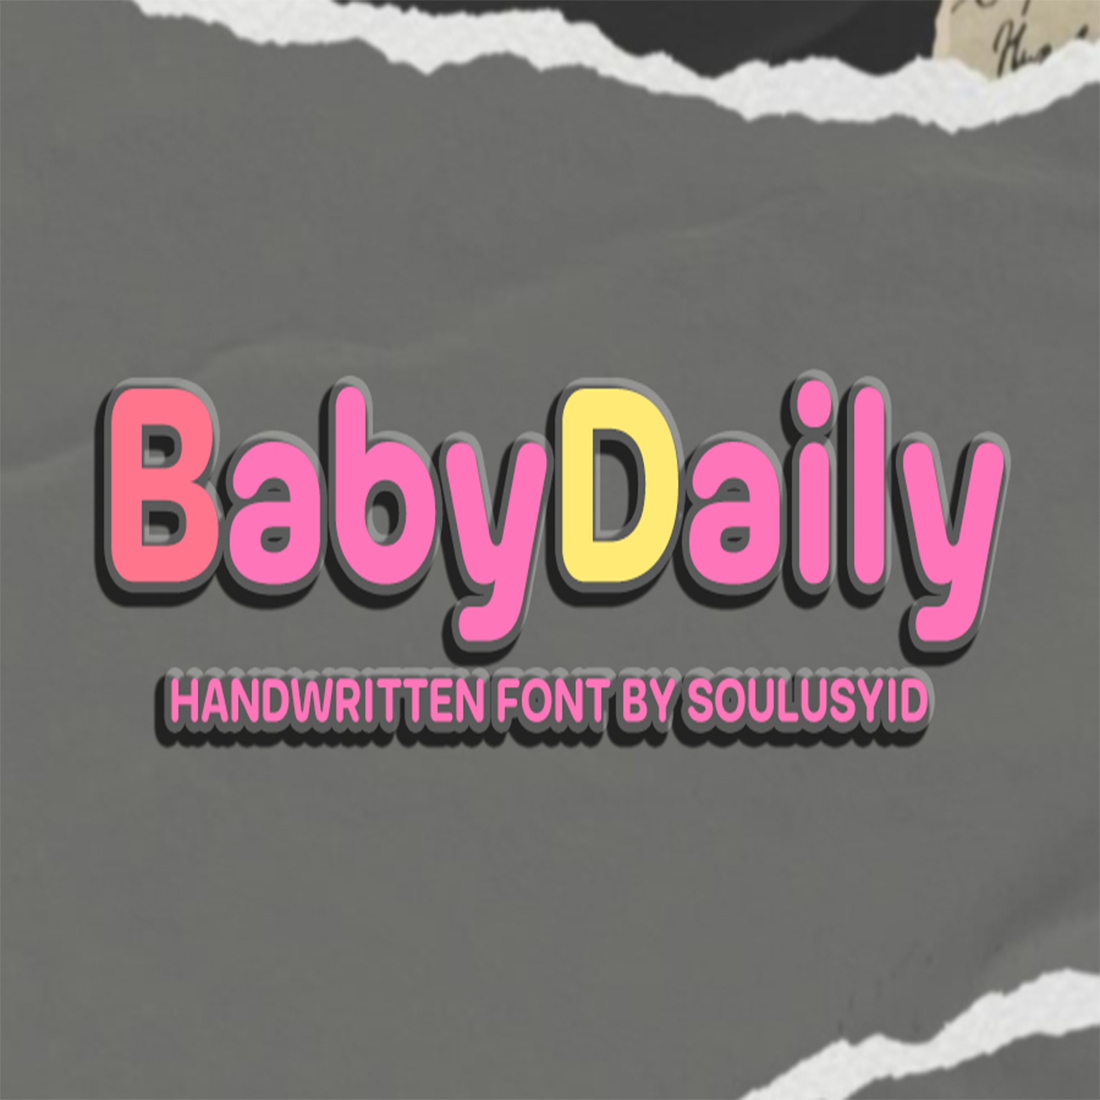 Babydaily cover image.